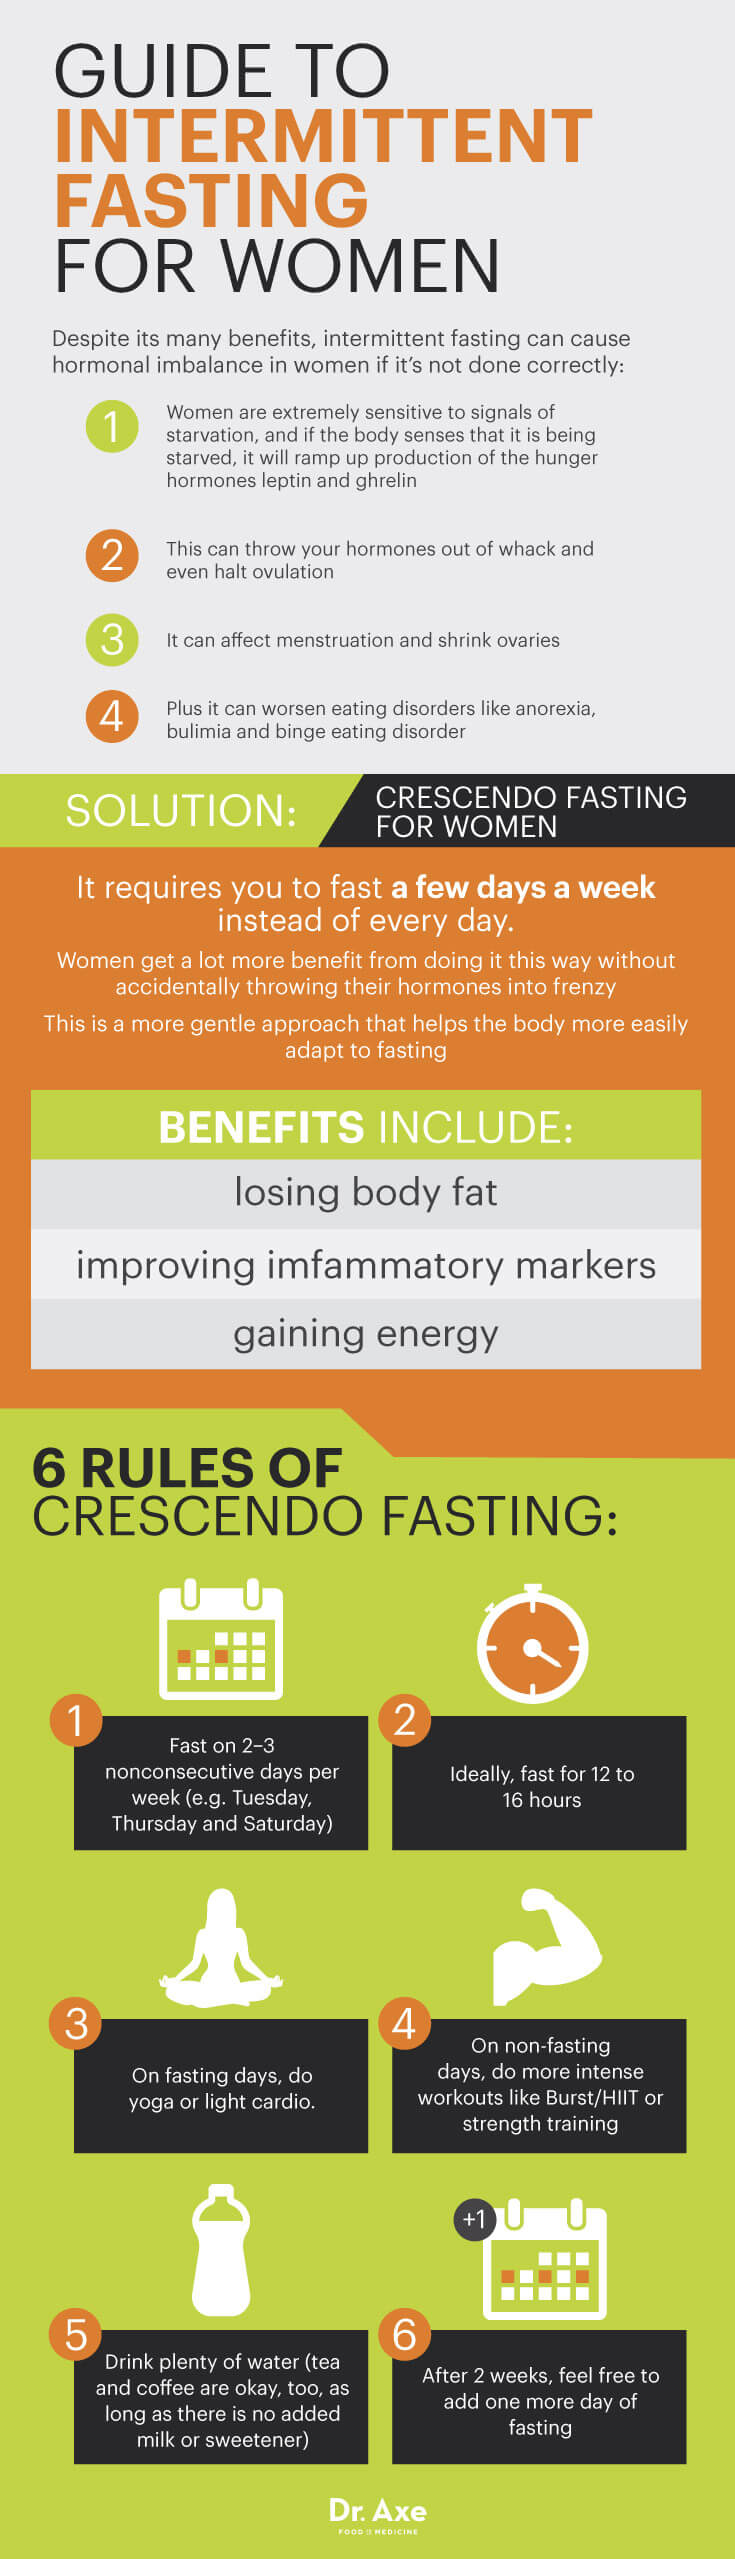 The Secret to Intermittent Fasting for Women - Dr. Axe